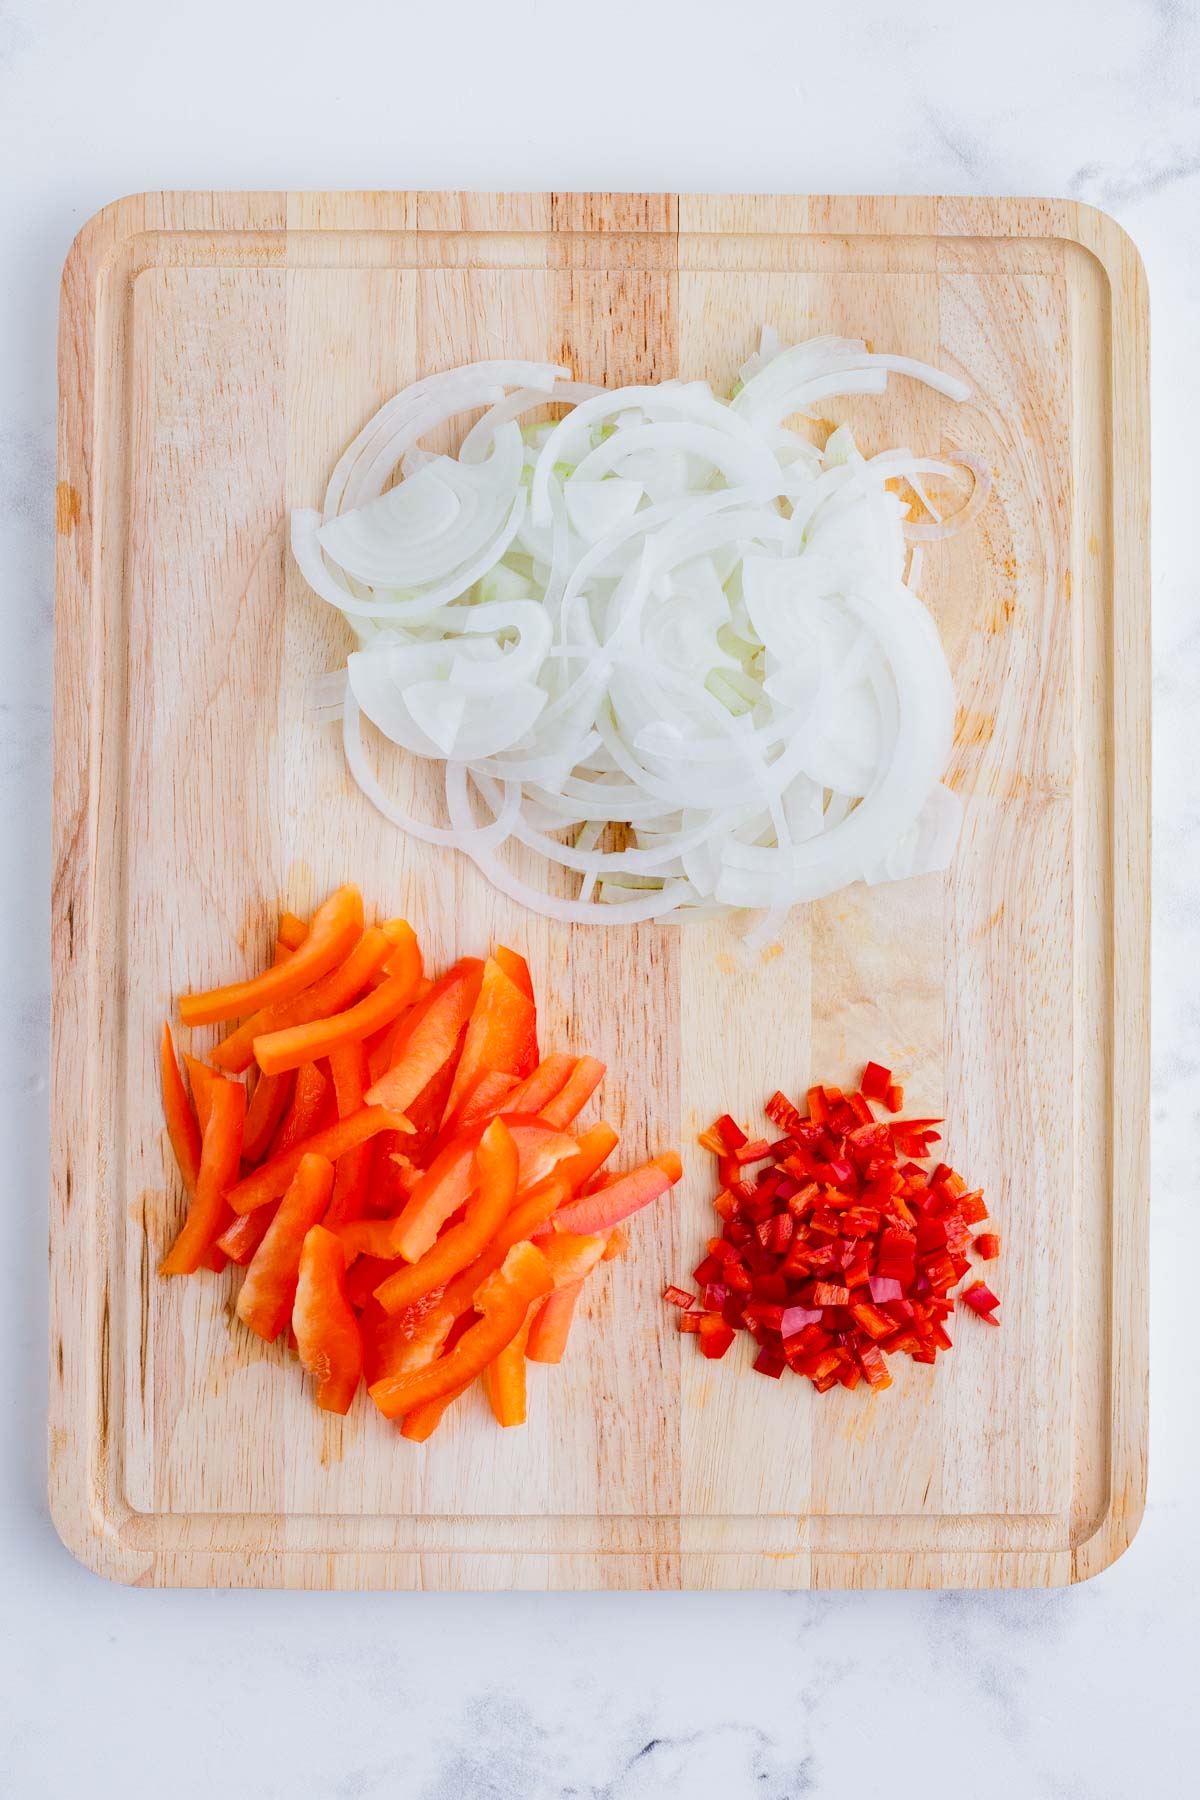 Onions, bell pepper, and Thai chilies are sliced and diced.